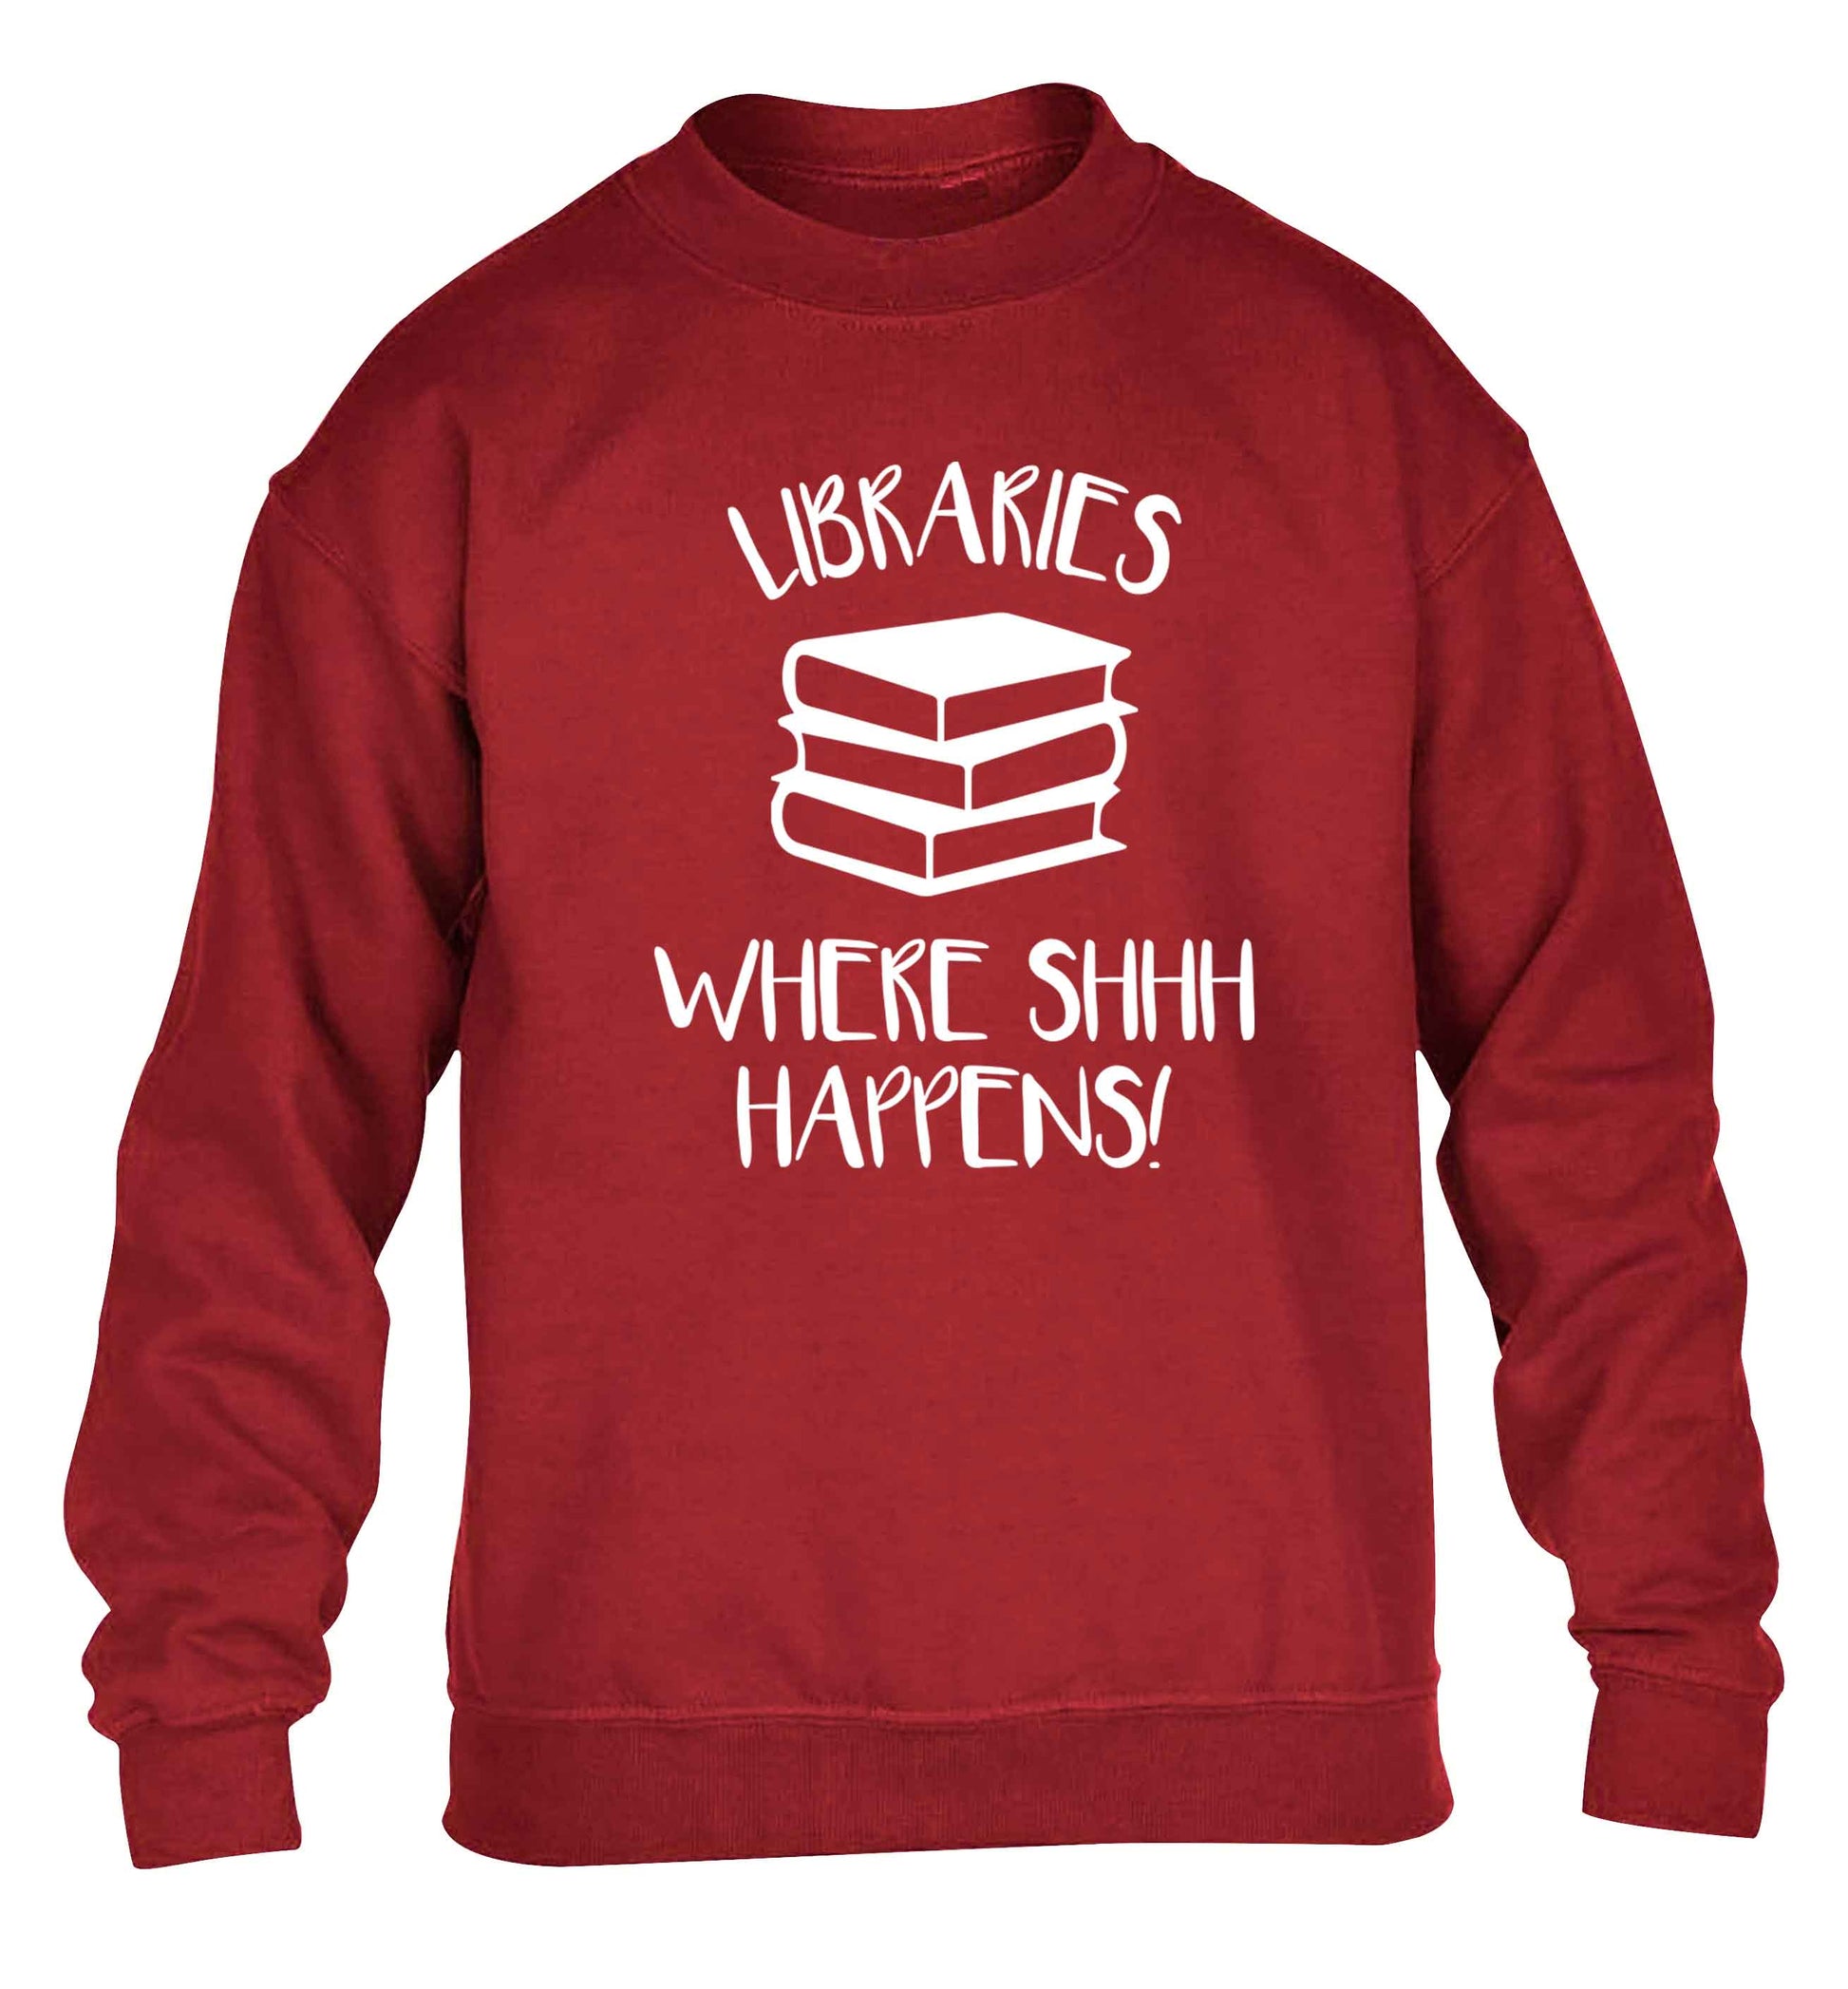 Libraries where shh happens! children's grey sweater 12-13 Years